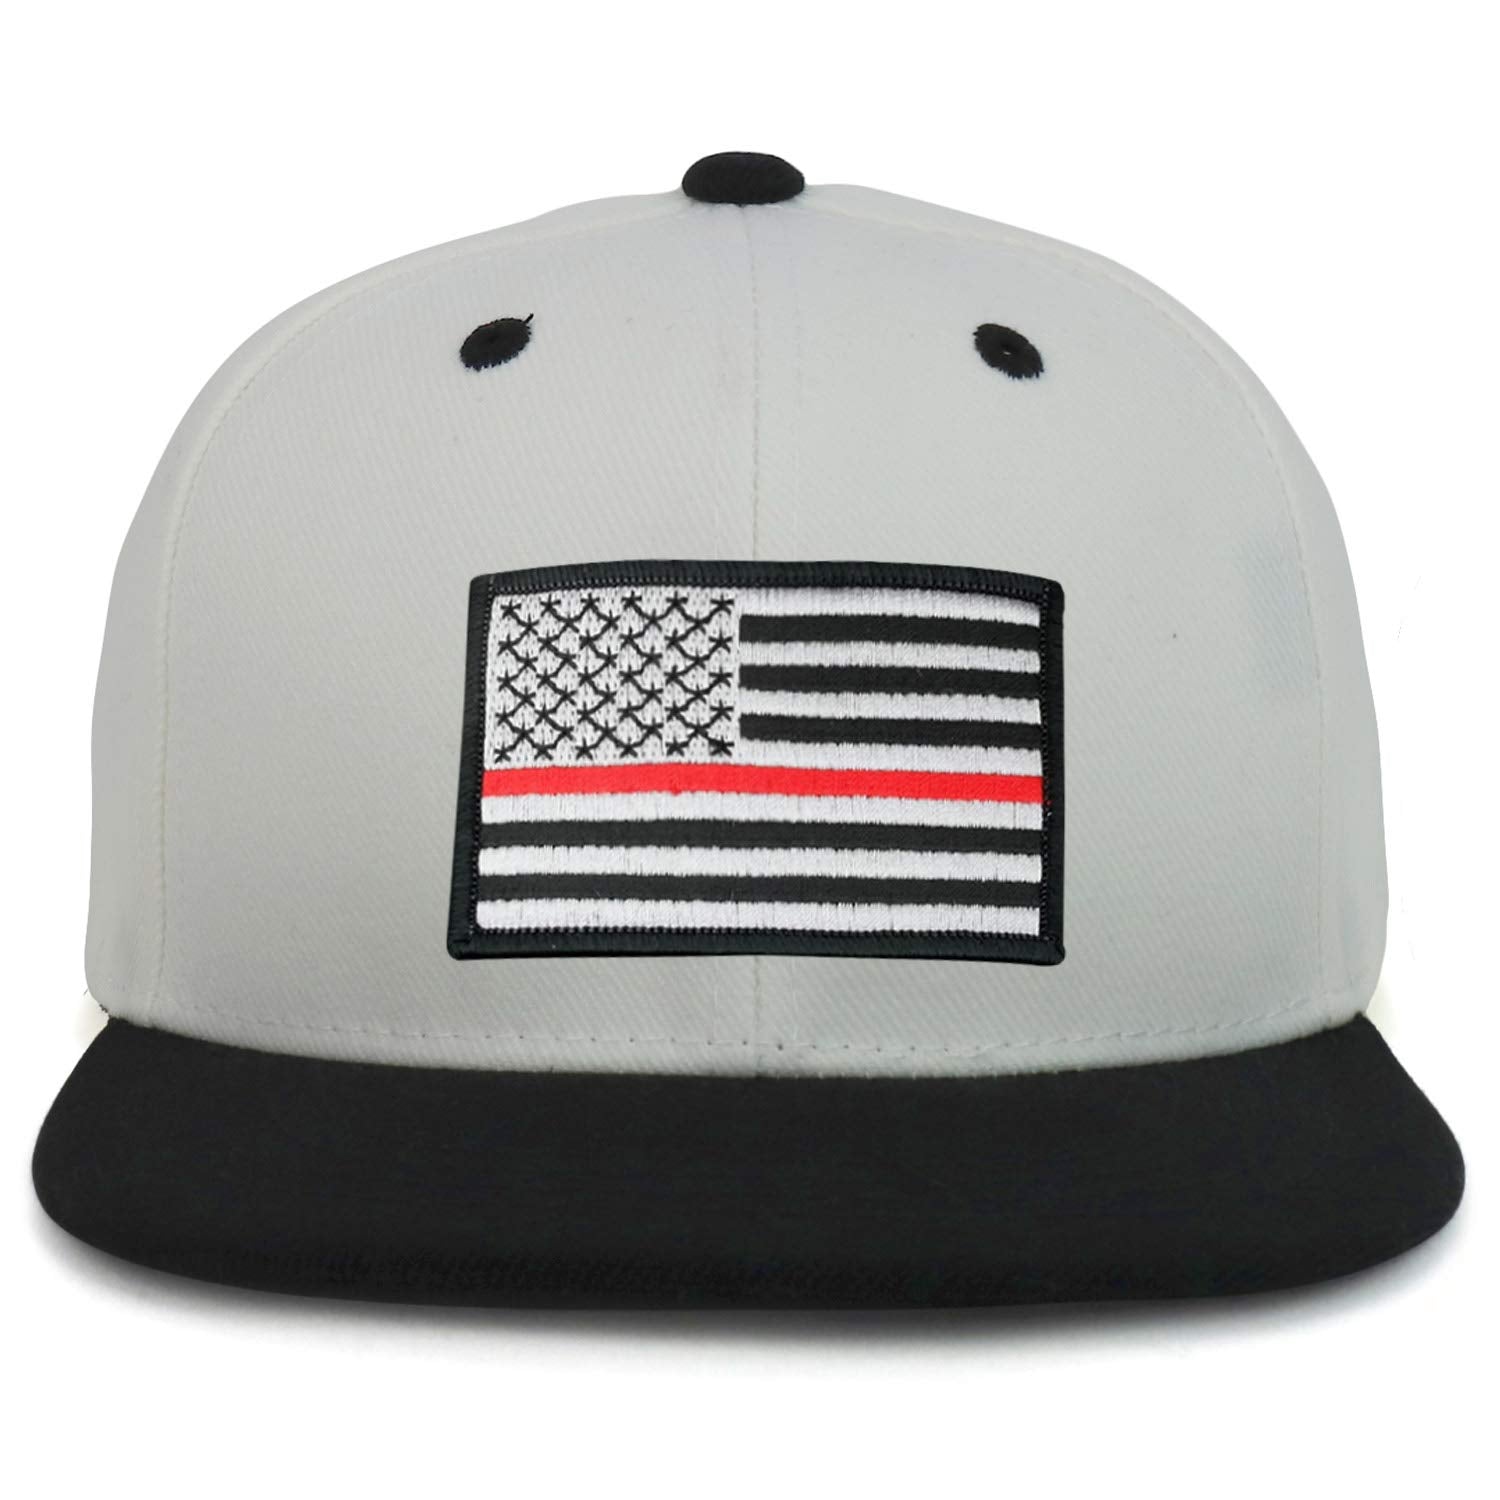 Armycrew Youth Kid's Thin Red Line 2 American Flag Patch Flat Bill Snapback 2-Tone Baseball Cap